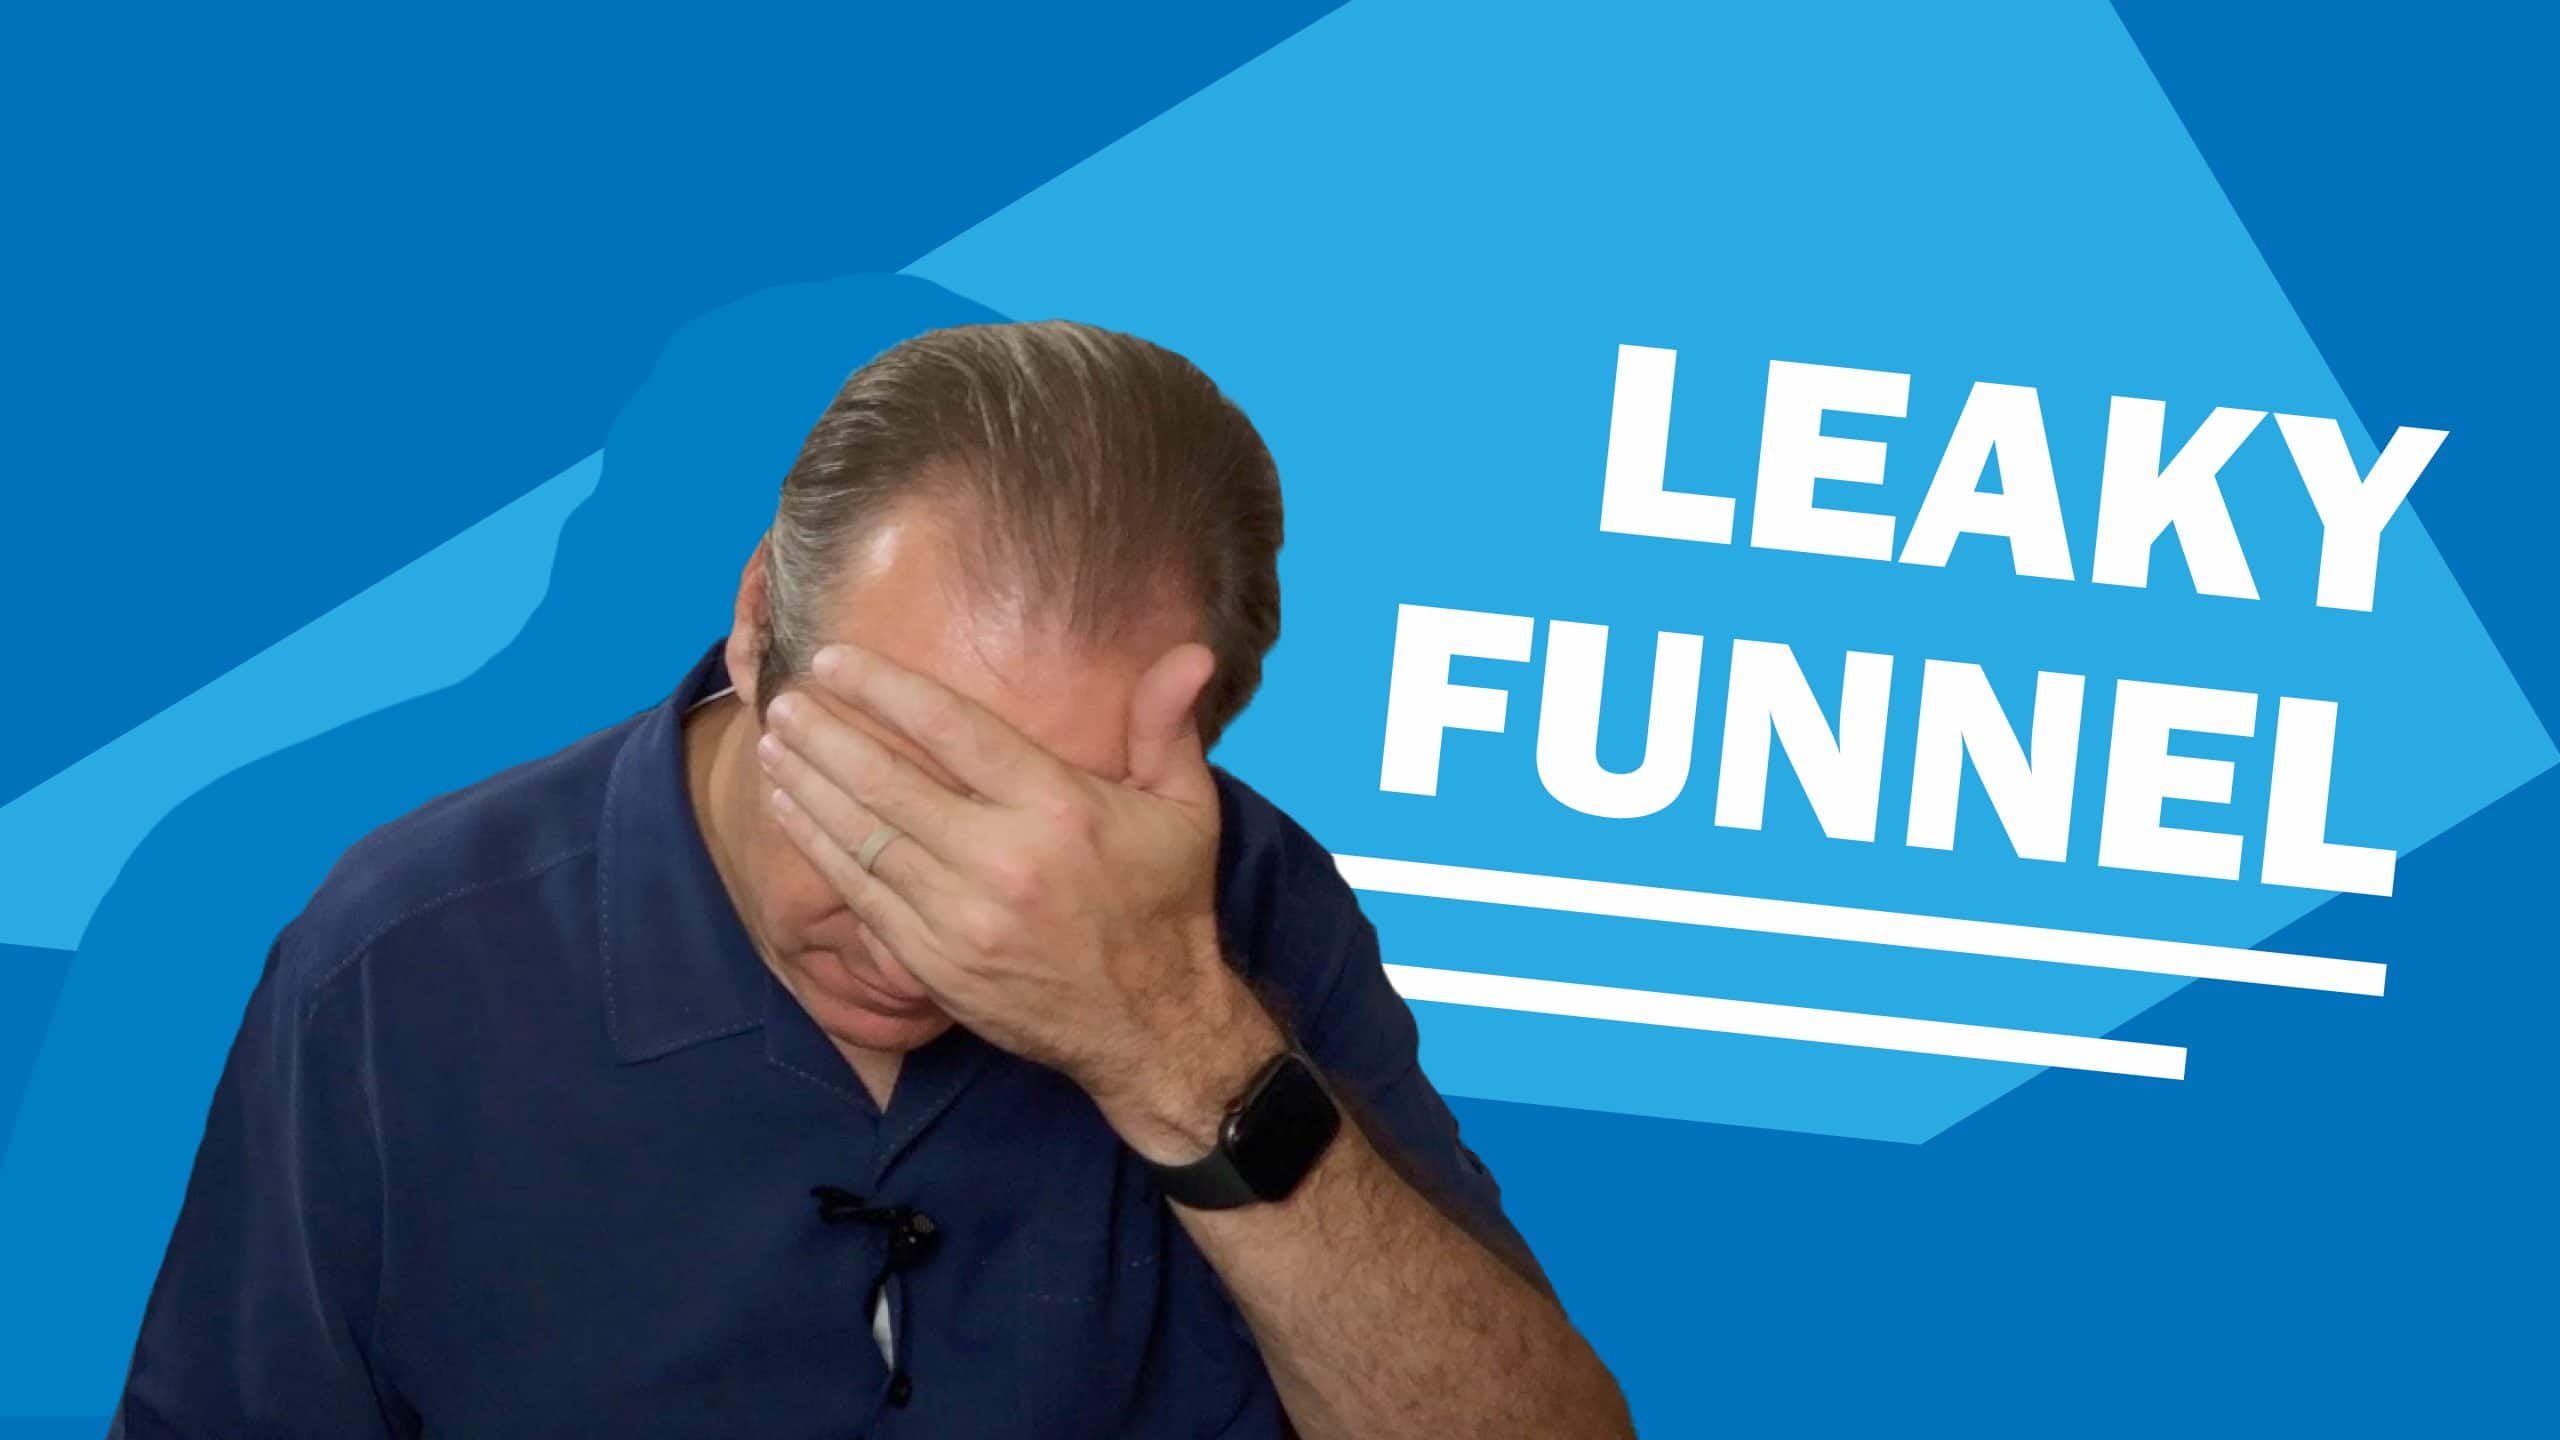 Does your business have a leaky funnel?